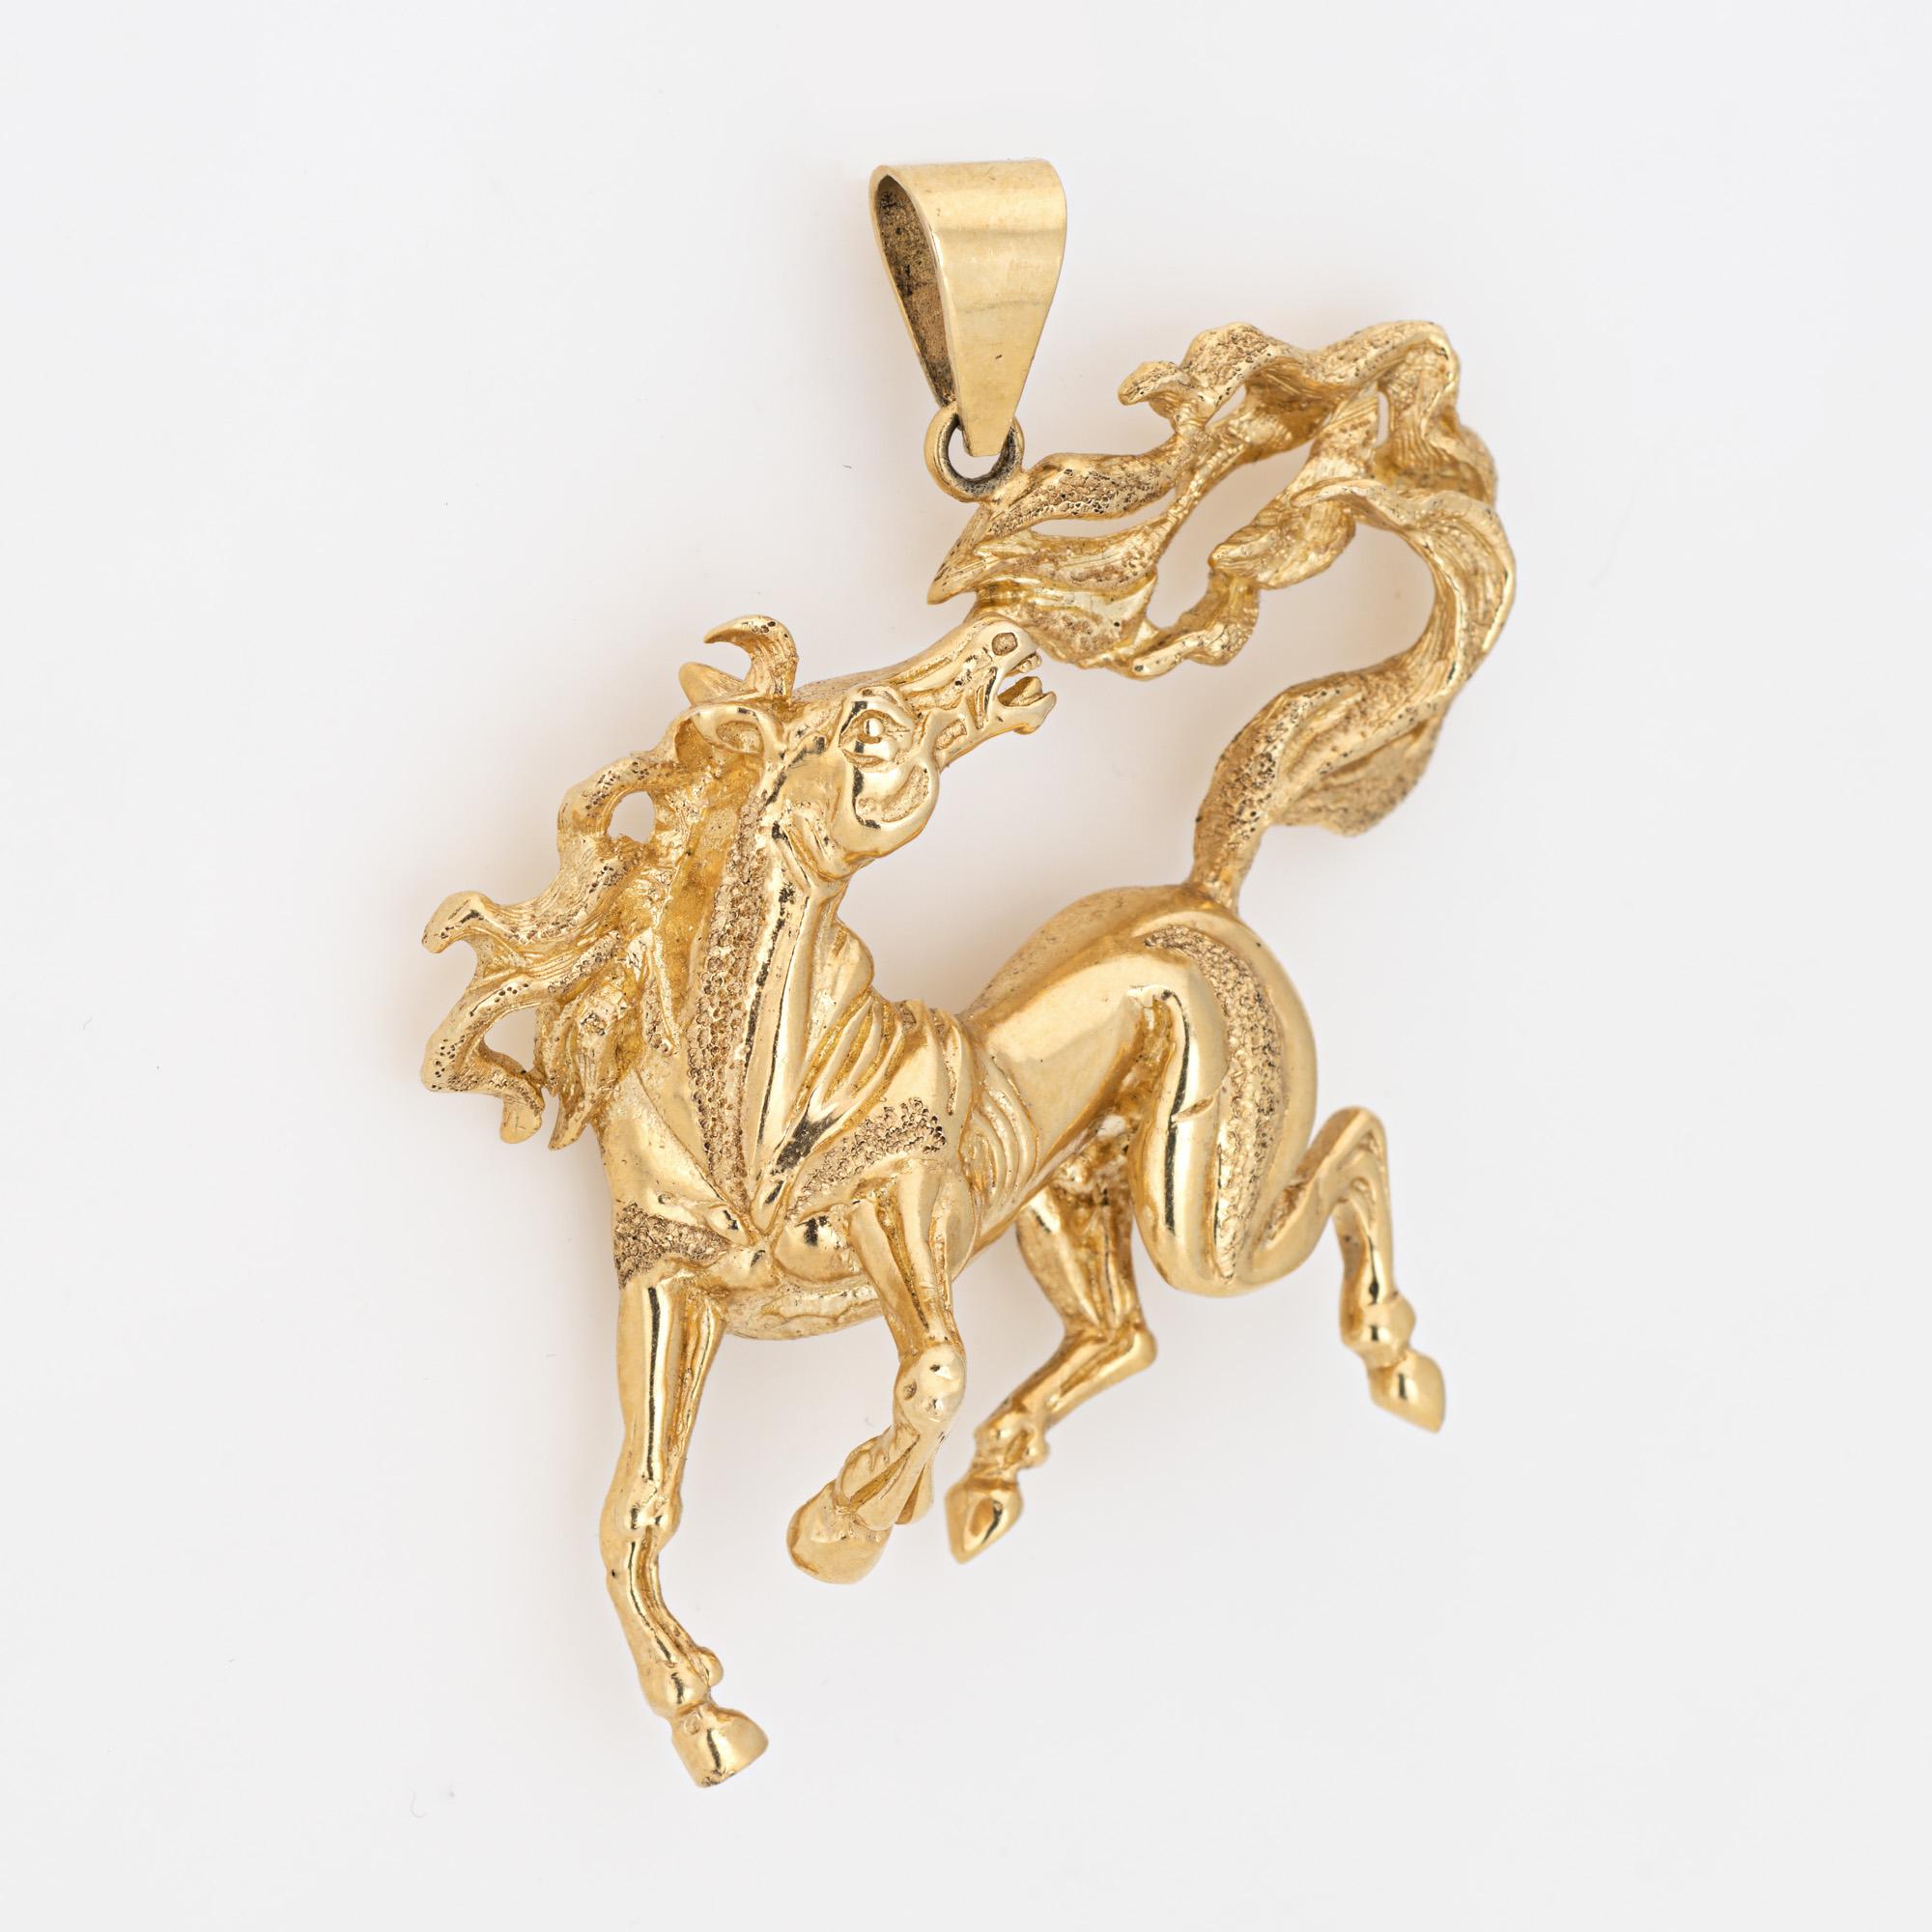 Modern Wild Horse Pendant Vintage 14k Yellow Gold Large Animal Jewelry Fine Estate For Sale